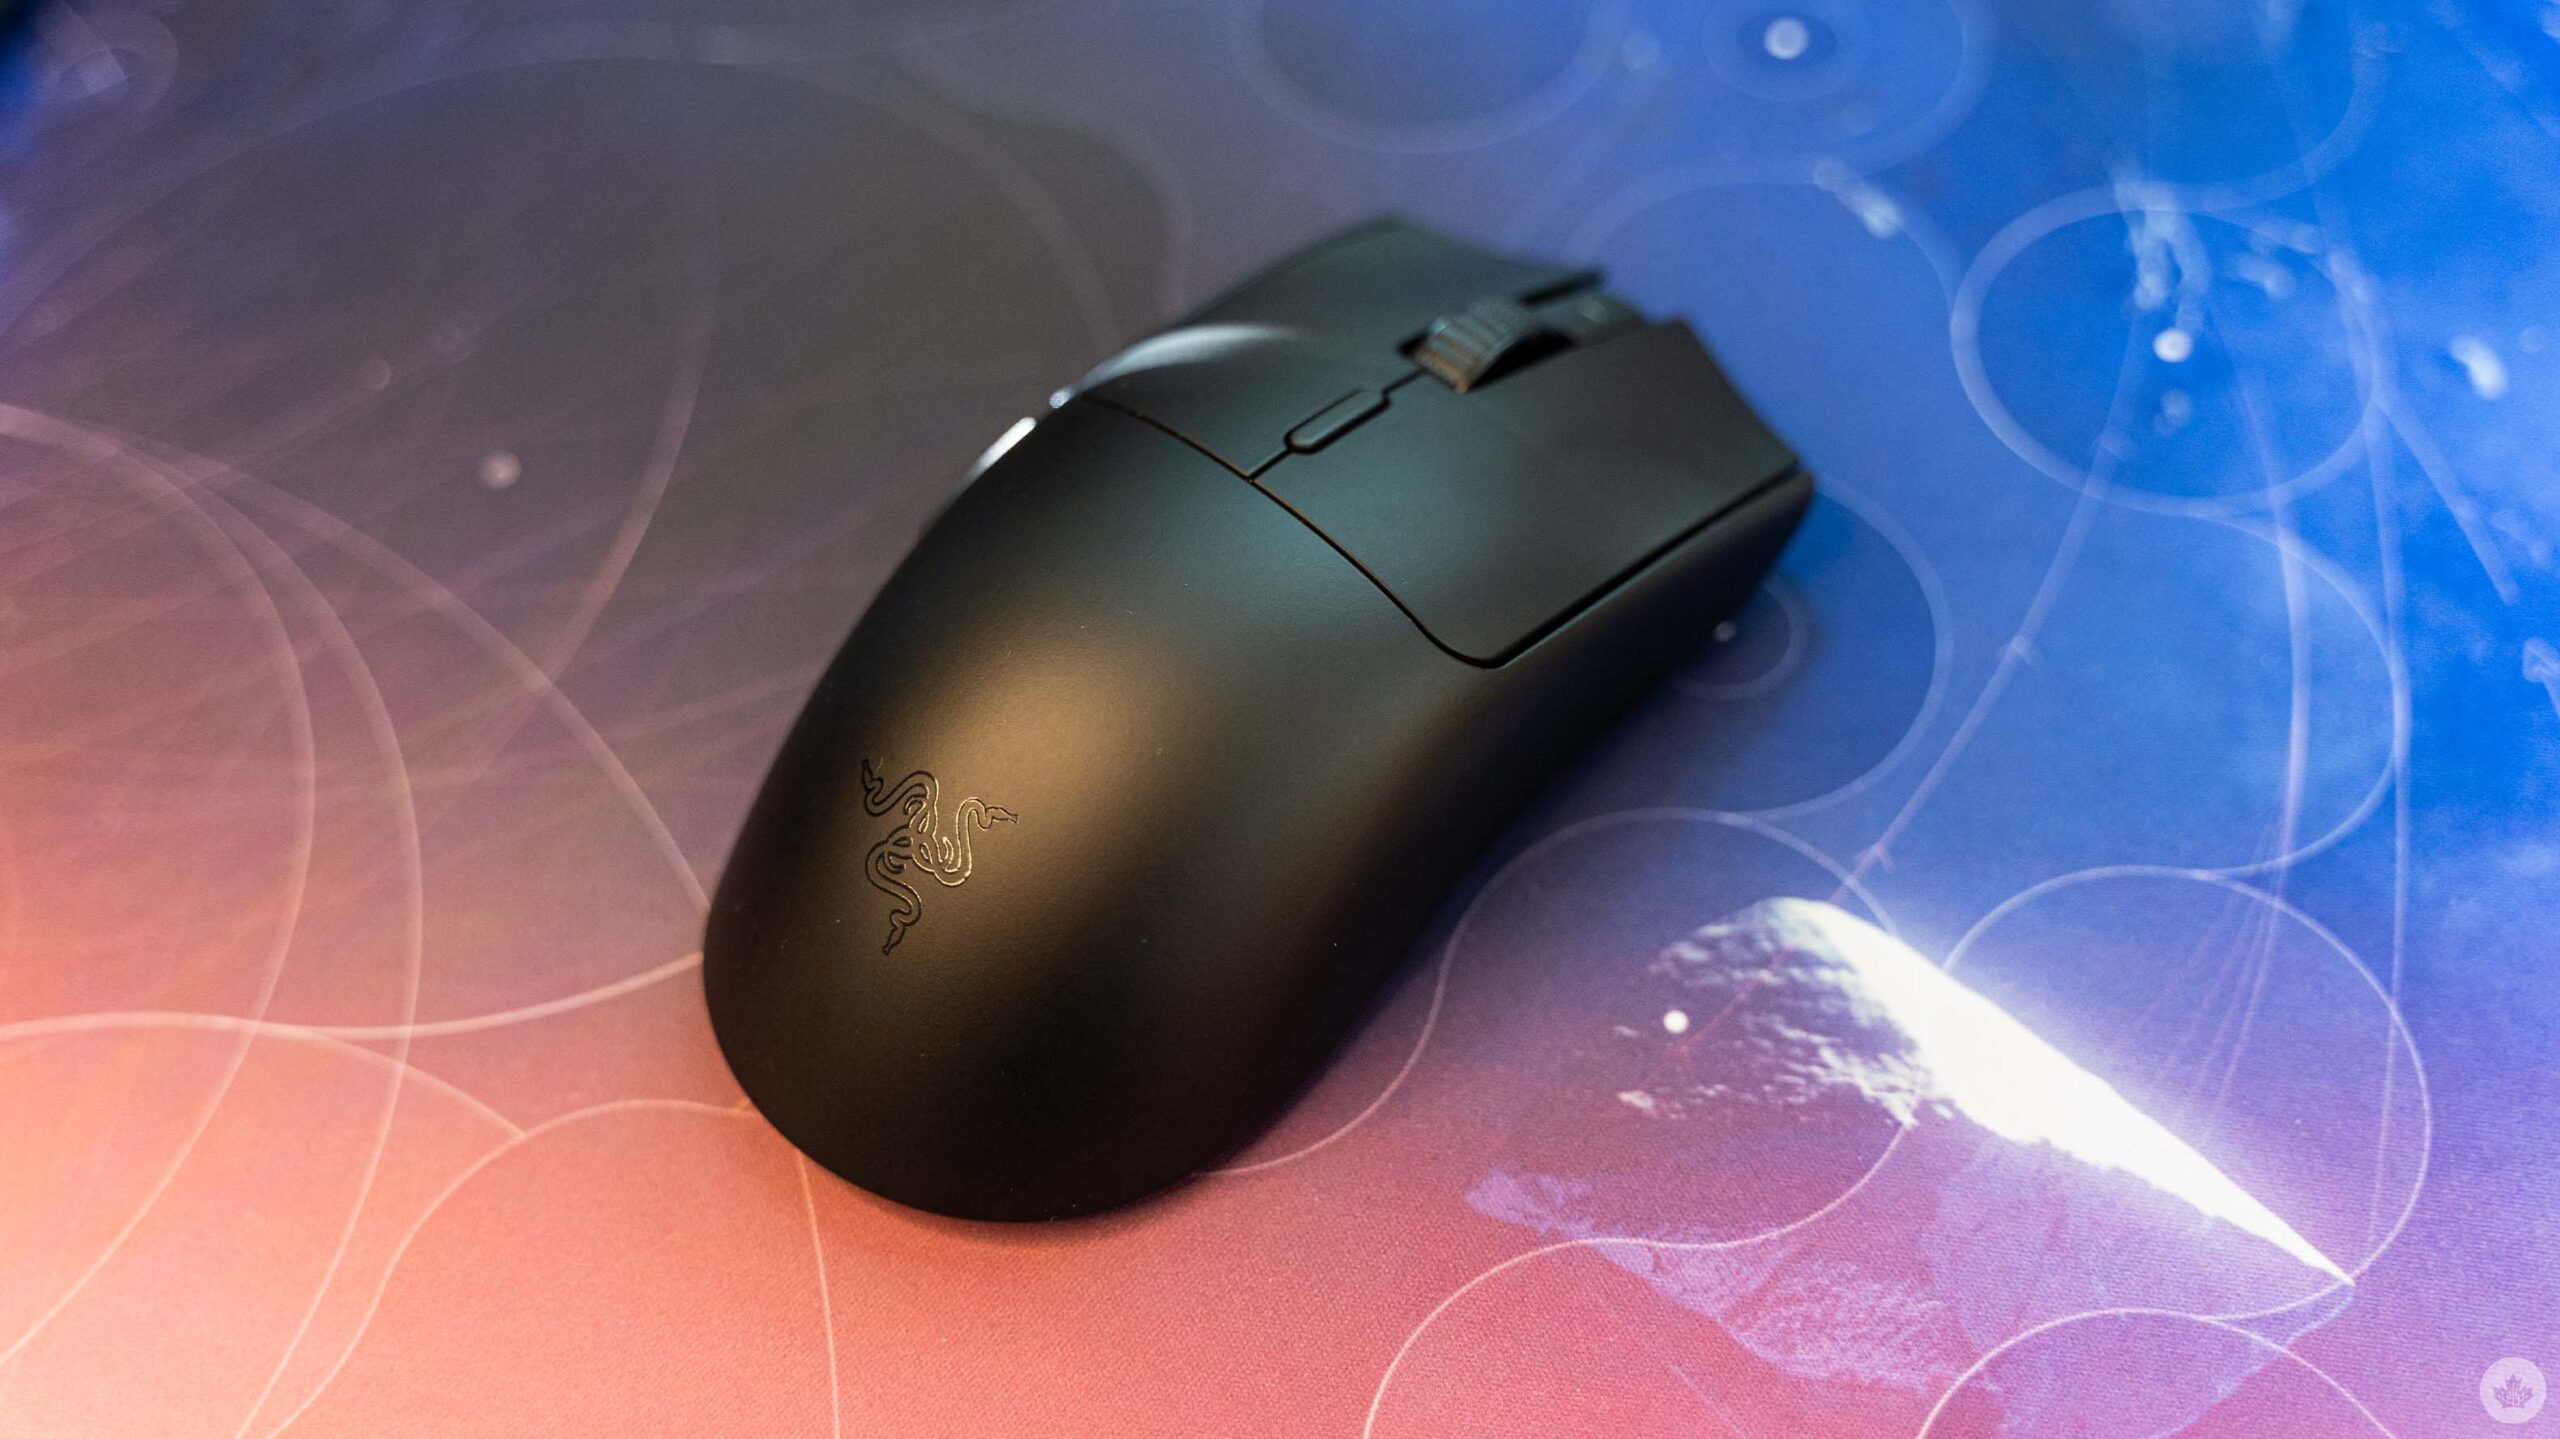 Razer Viper V3 Hyperspeed is a great no-frills gaming mouse